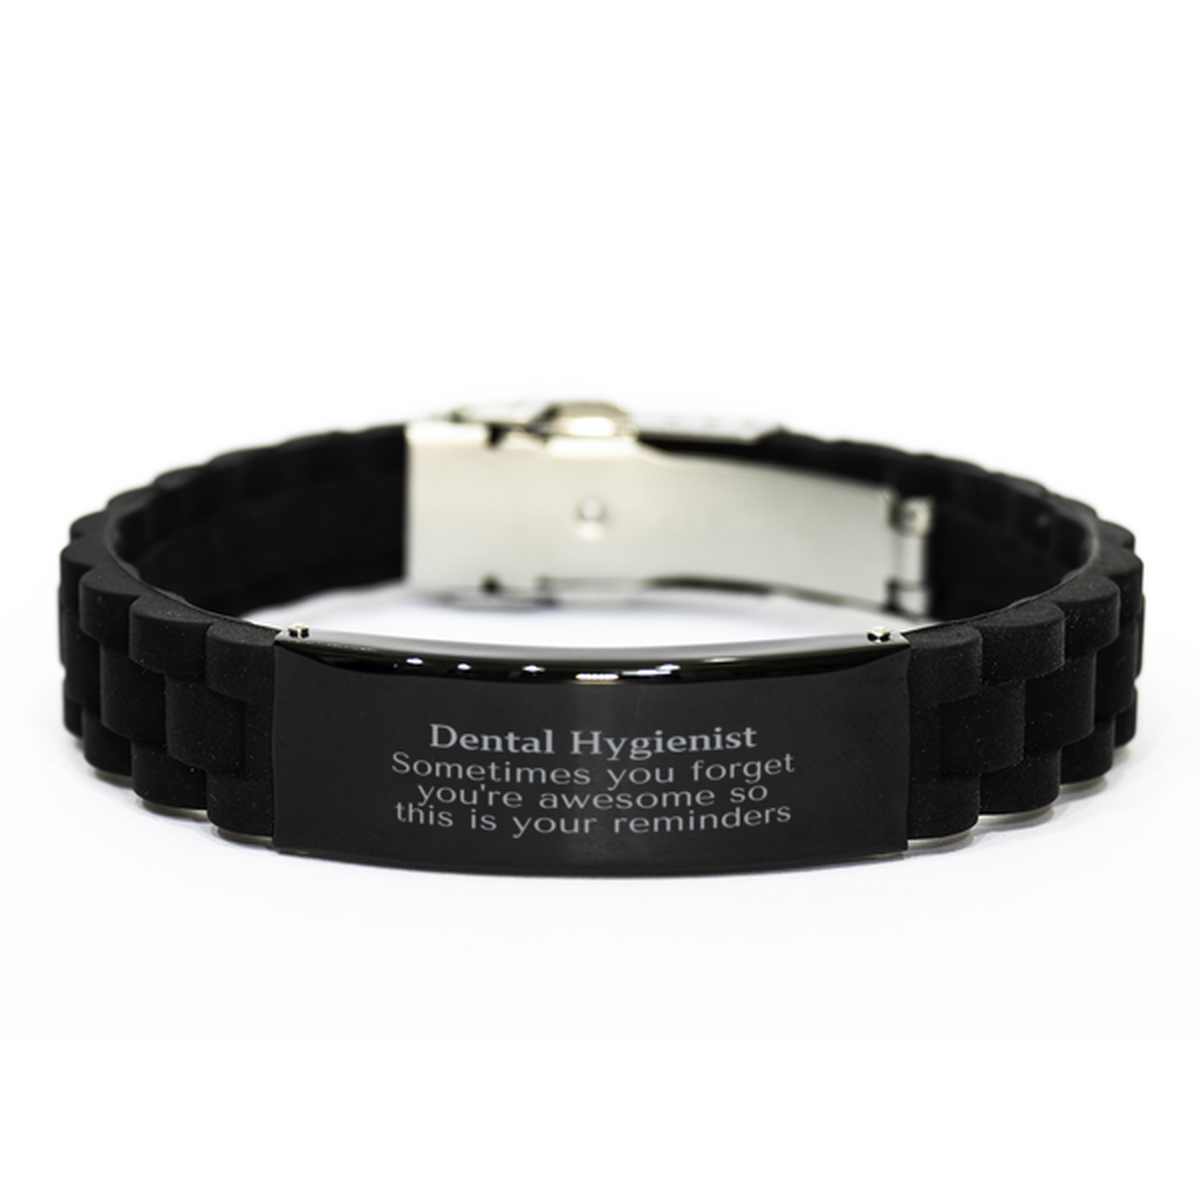 Sentimental Dental Hygienist Black Glidelock Clasp Bracelet, Dental Hygienist Sometimes you forget you're awesome so this is your reminders, Graduation Christmas Birthday Gifts for Dental Hygienist, Men, Women, Coworkers